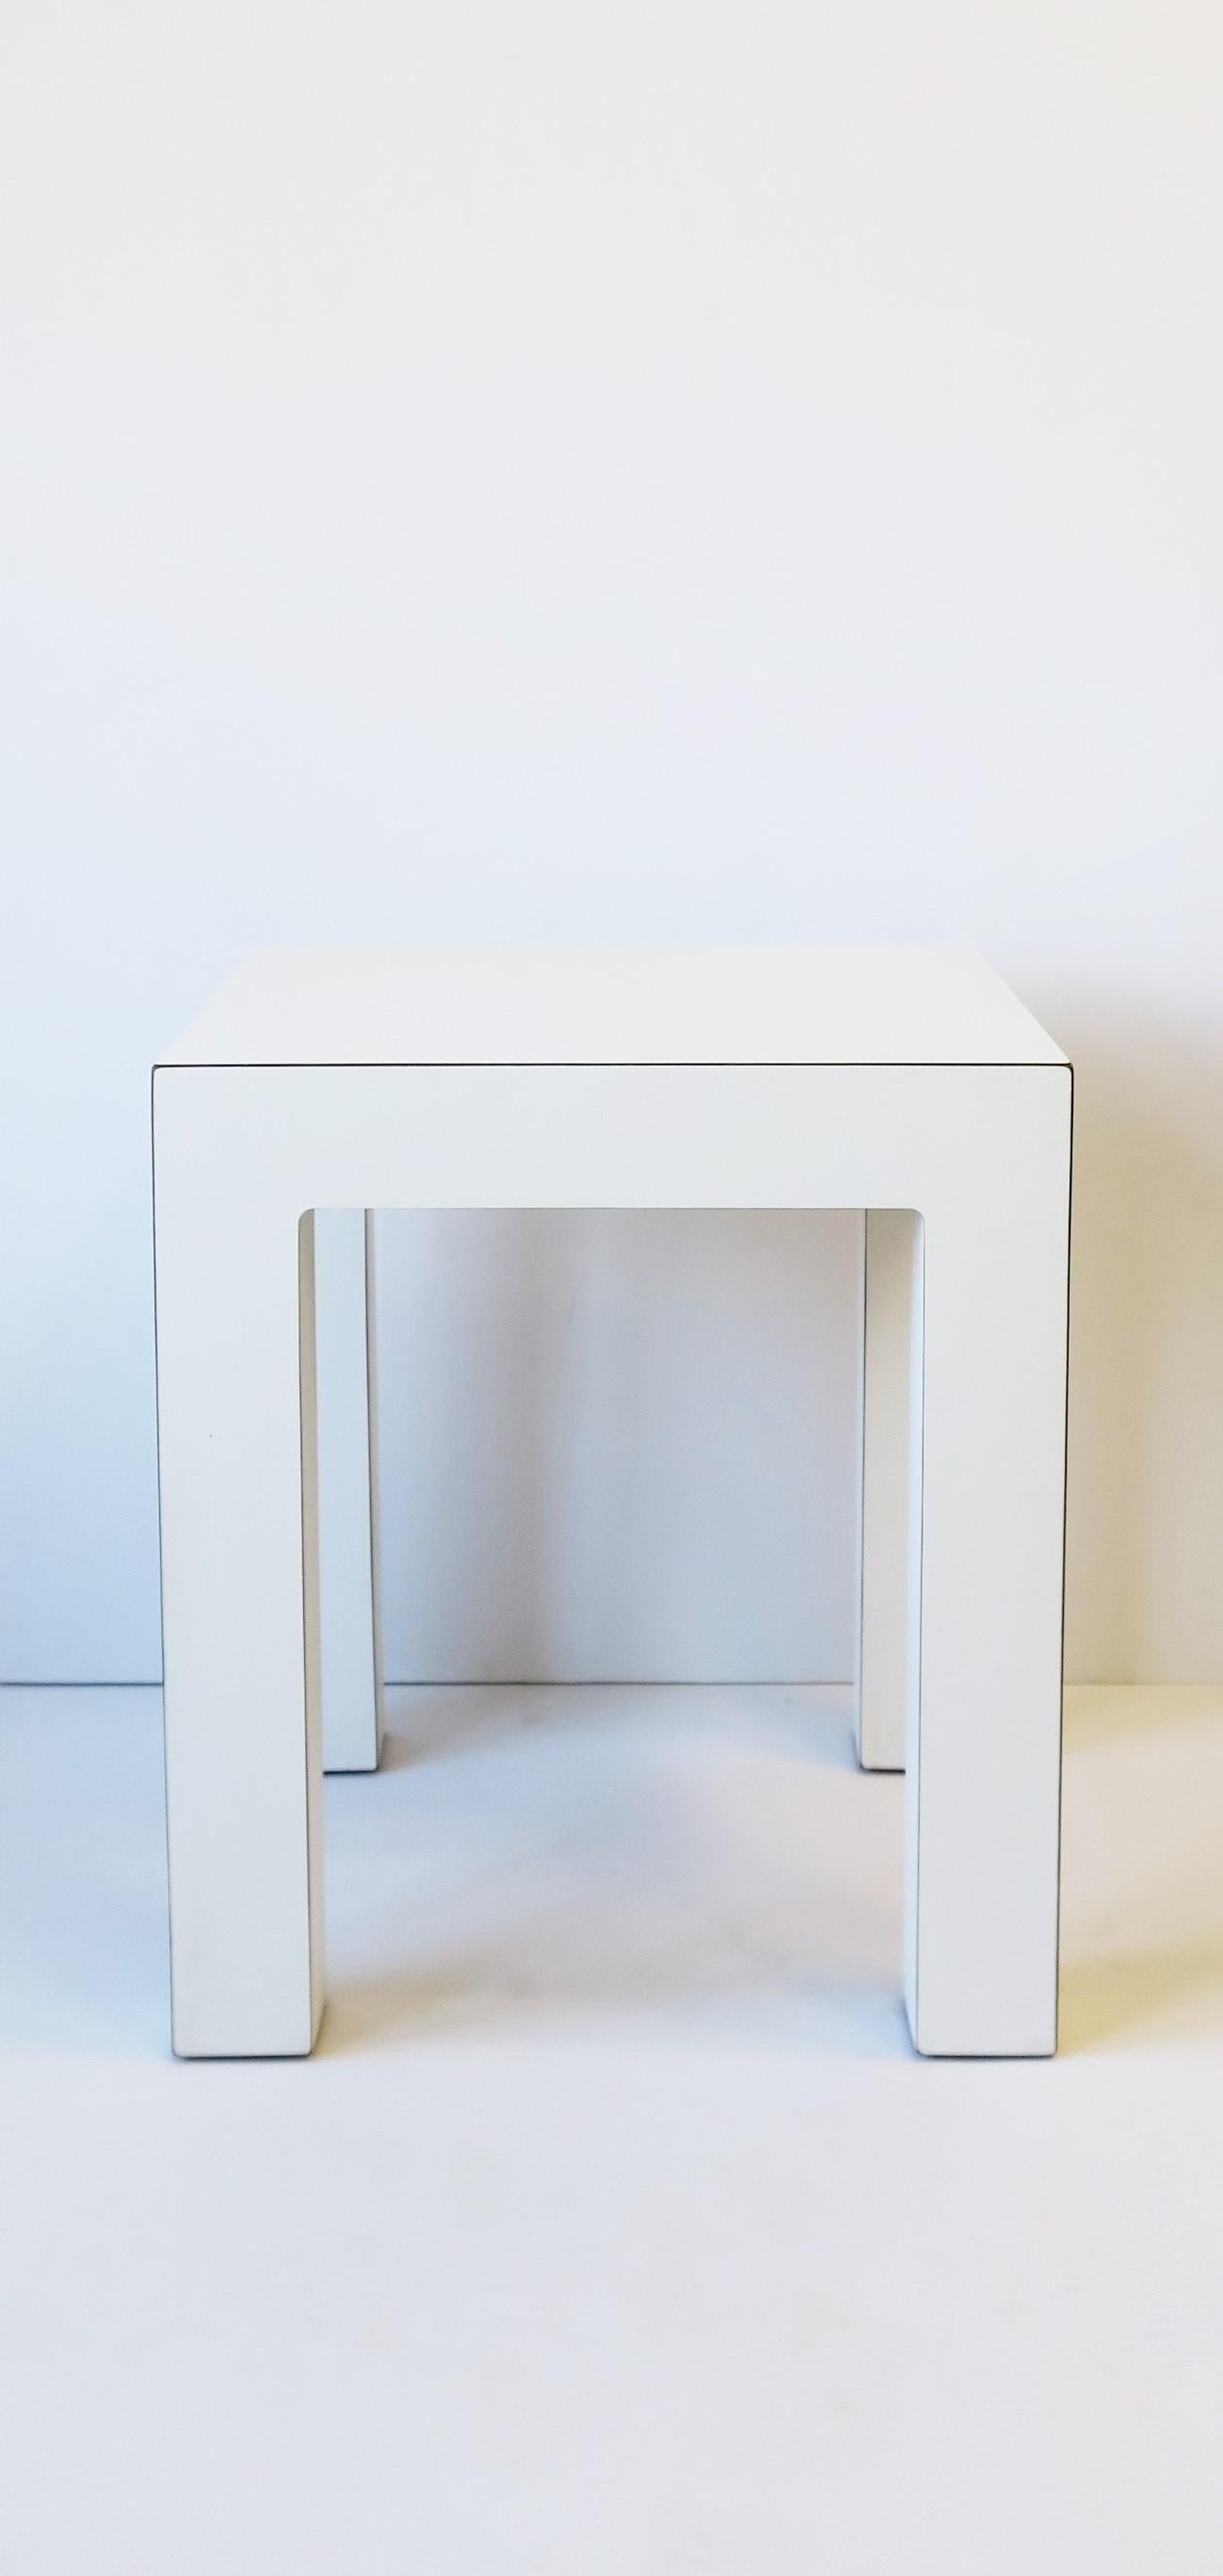 A '70s Modern white matte laminate end table with nice lines, circa 1970s late 20th century. Great as an end table or other uses, in a convenient size. Dimensions: 16